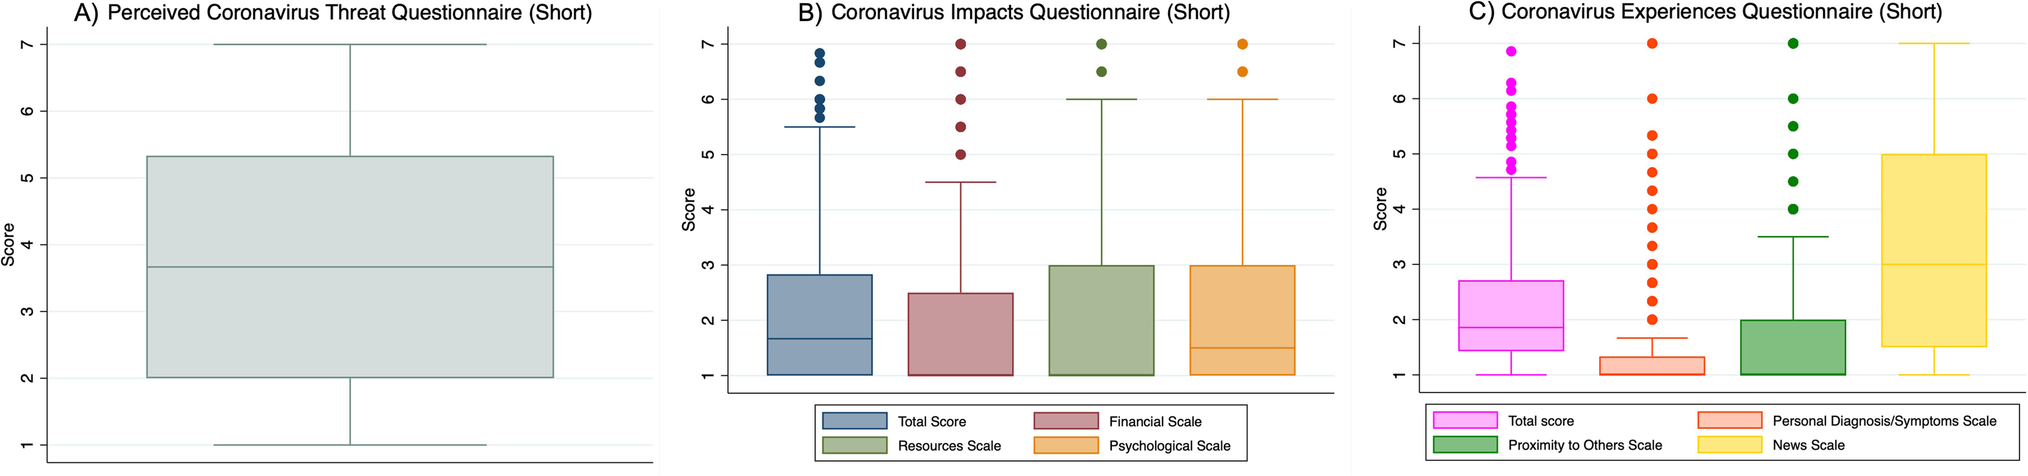 COVID-19 perceptions, impacts, and experiences: a cross-sectional analysis among New Jersey cancer survivors